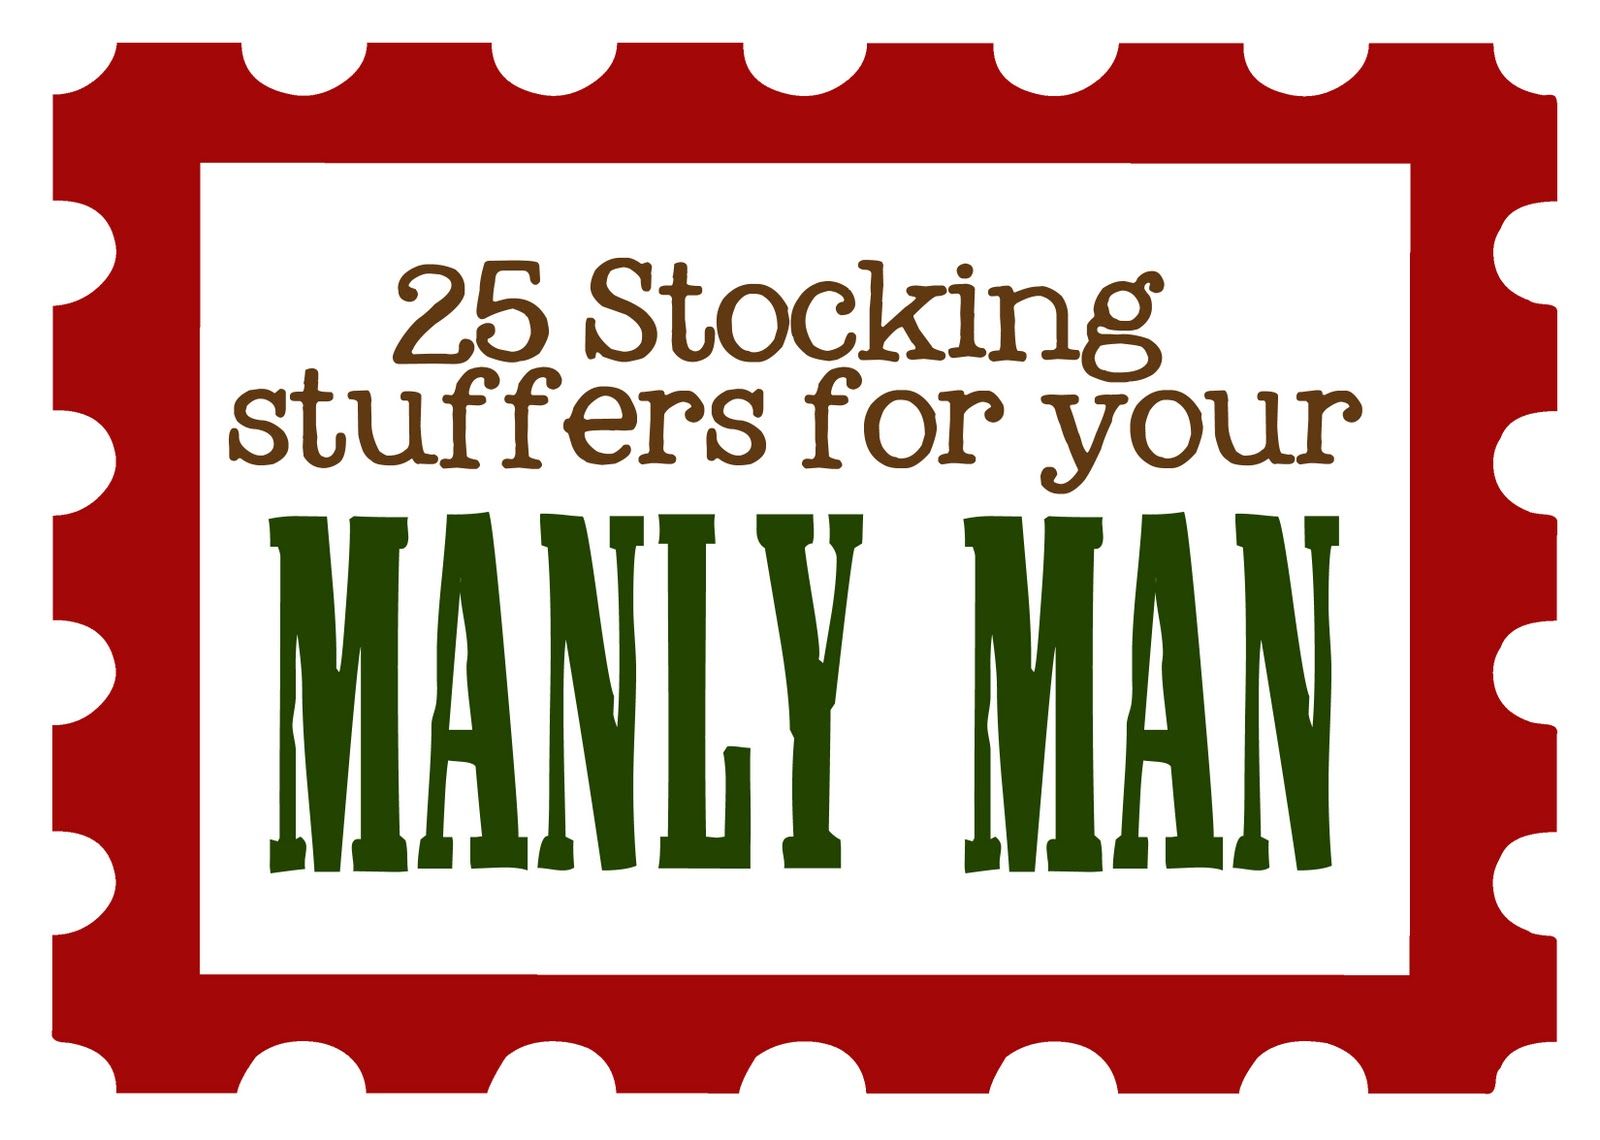 Stocking ideas for guys (dads, husbands, brothers).